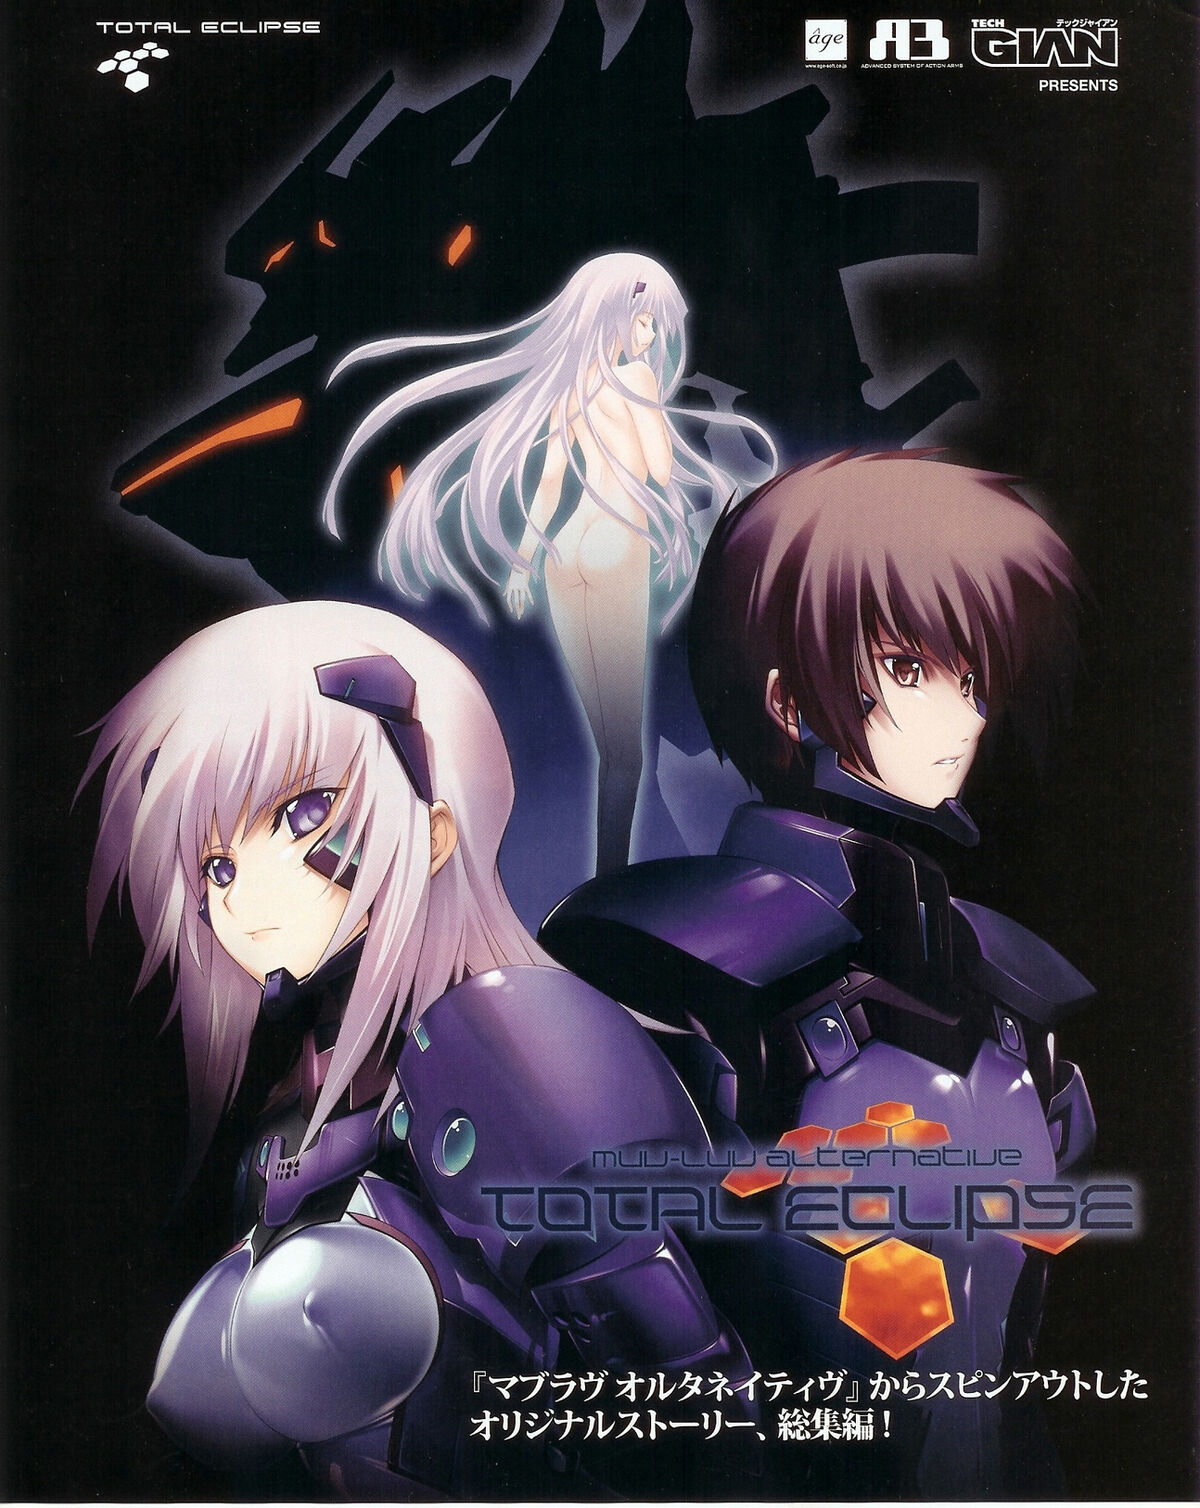 Muv-Luv Alternative - Total Eclipse: Complete Collection (15) 4 Disc - CeX  (UK): - Buy, Sell, Donate